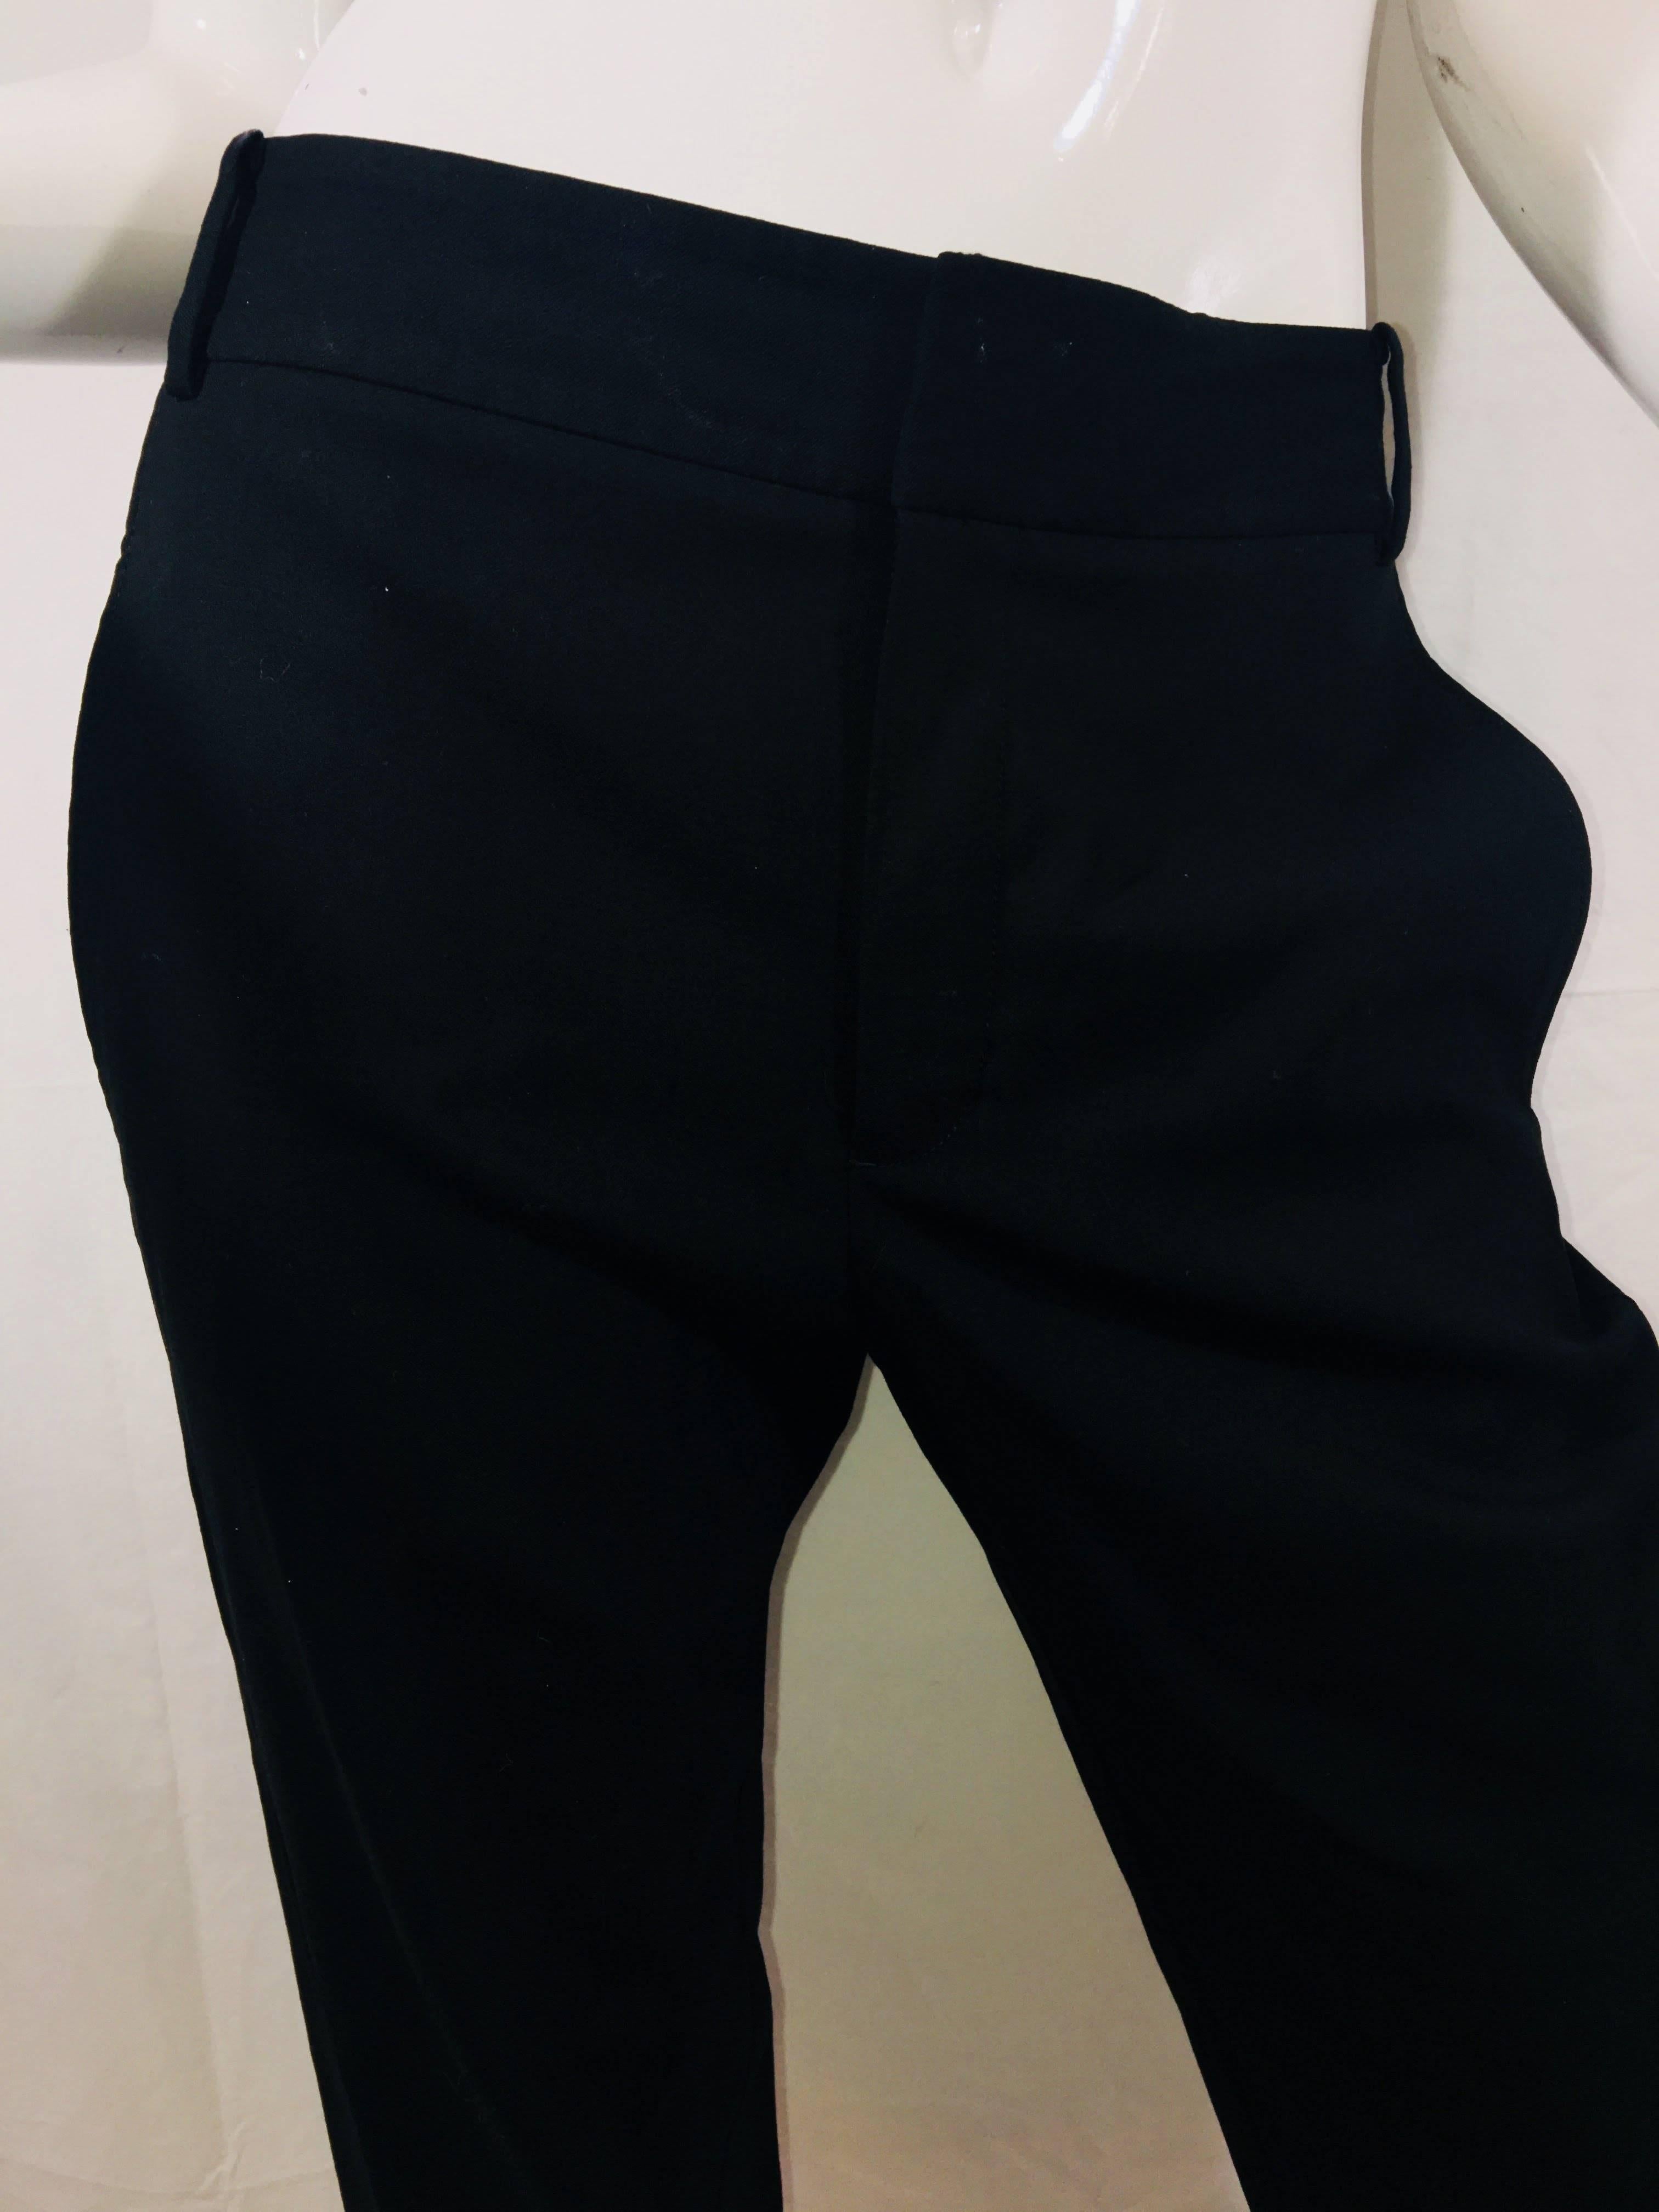 Helmut Lang Skinny Leg Cropped Pant with Elastic at Cuffs